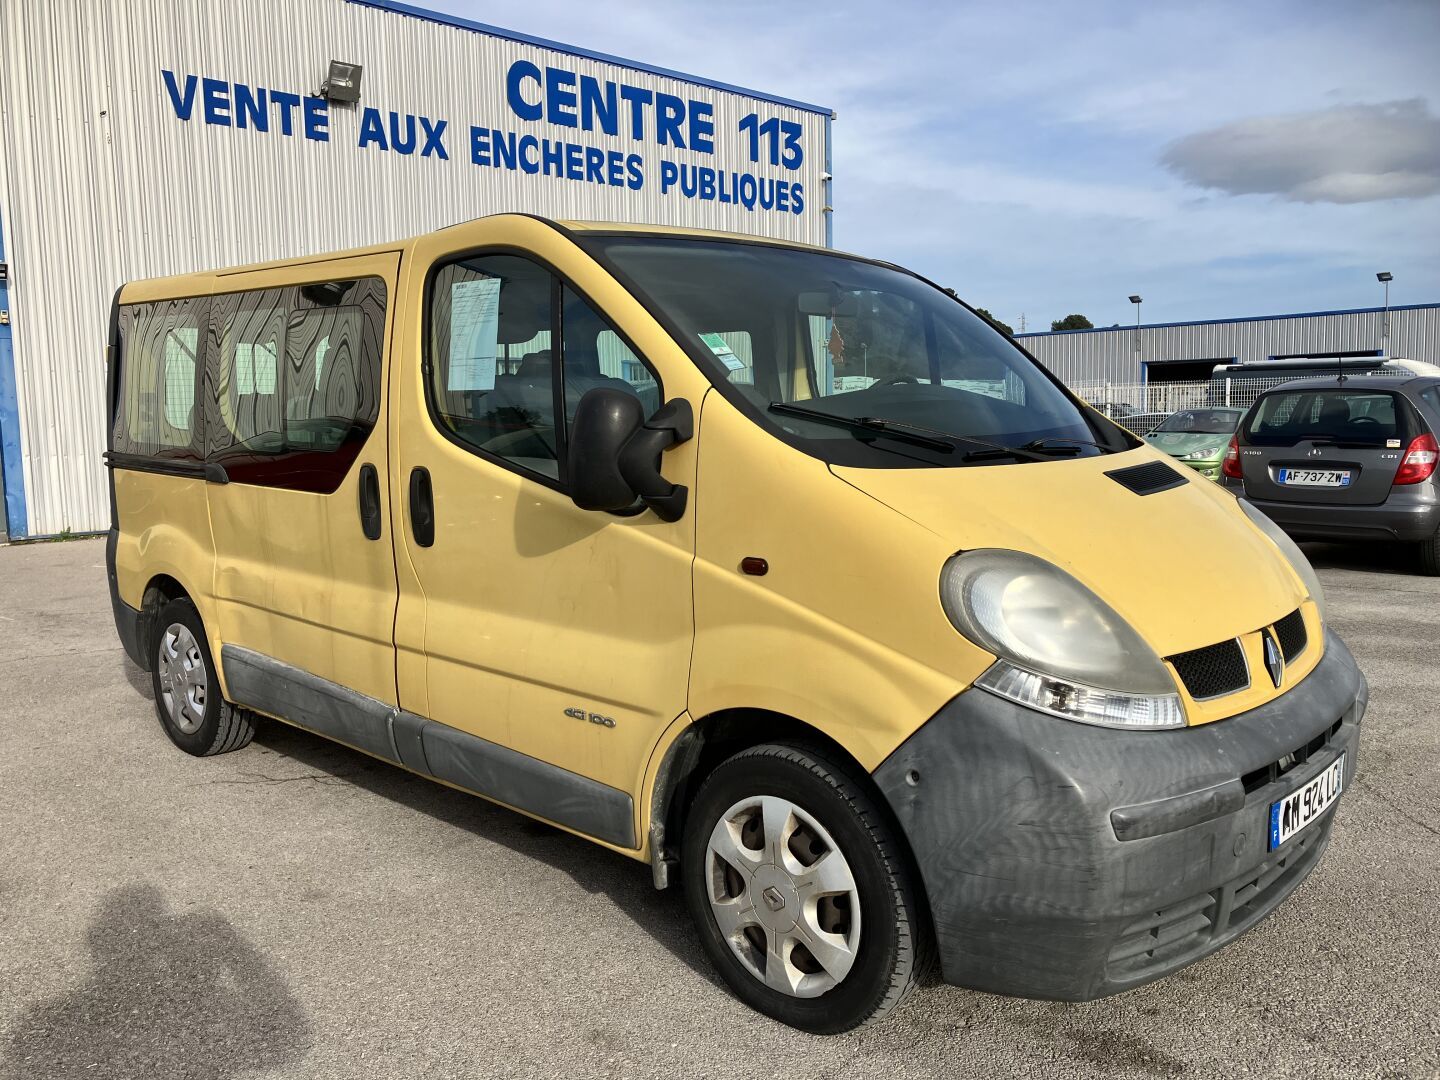 Null TRAFIC 1.9 DCI 100 CH
VP RENAULT TRAFIC 1.9 DCI 100 CH 1.9 DCI
Carrosserie &hellip;